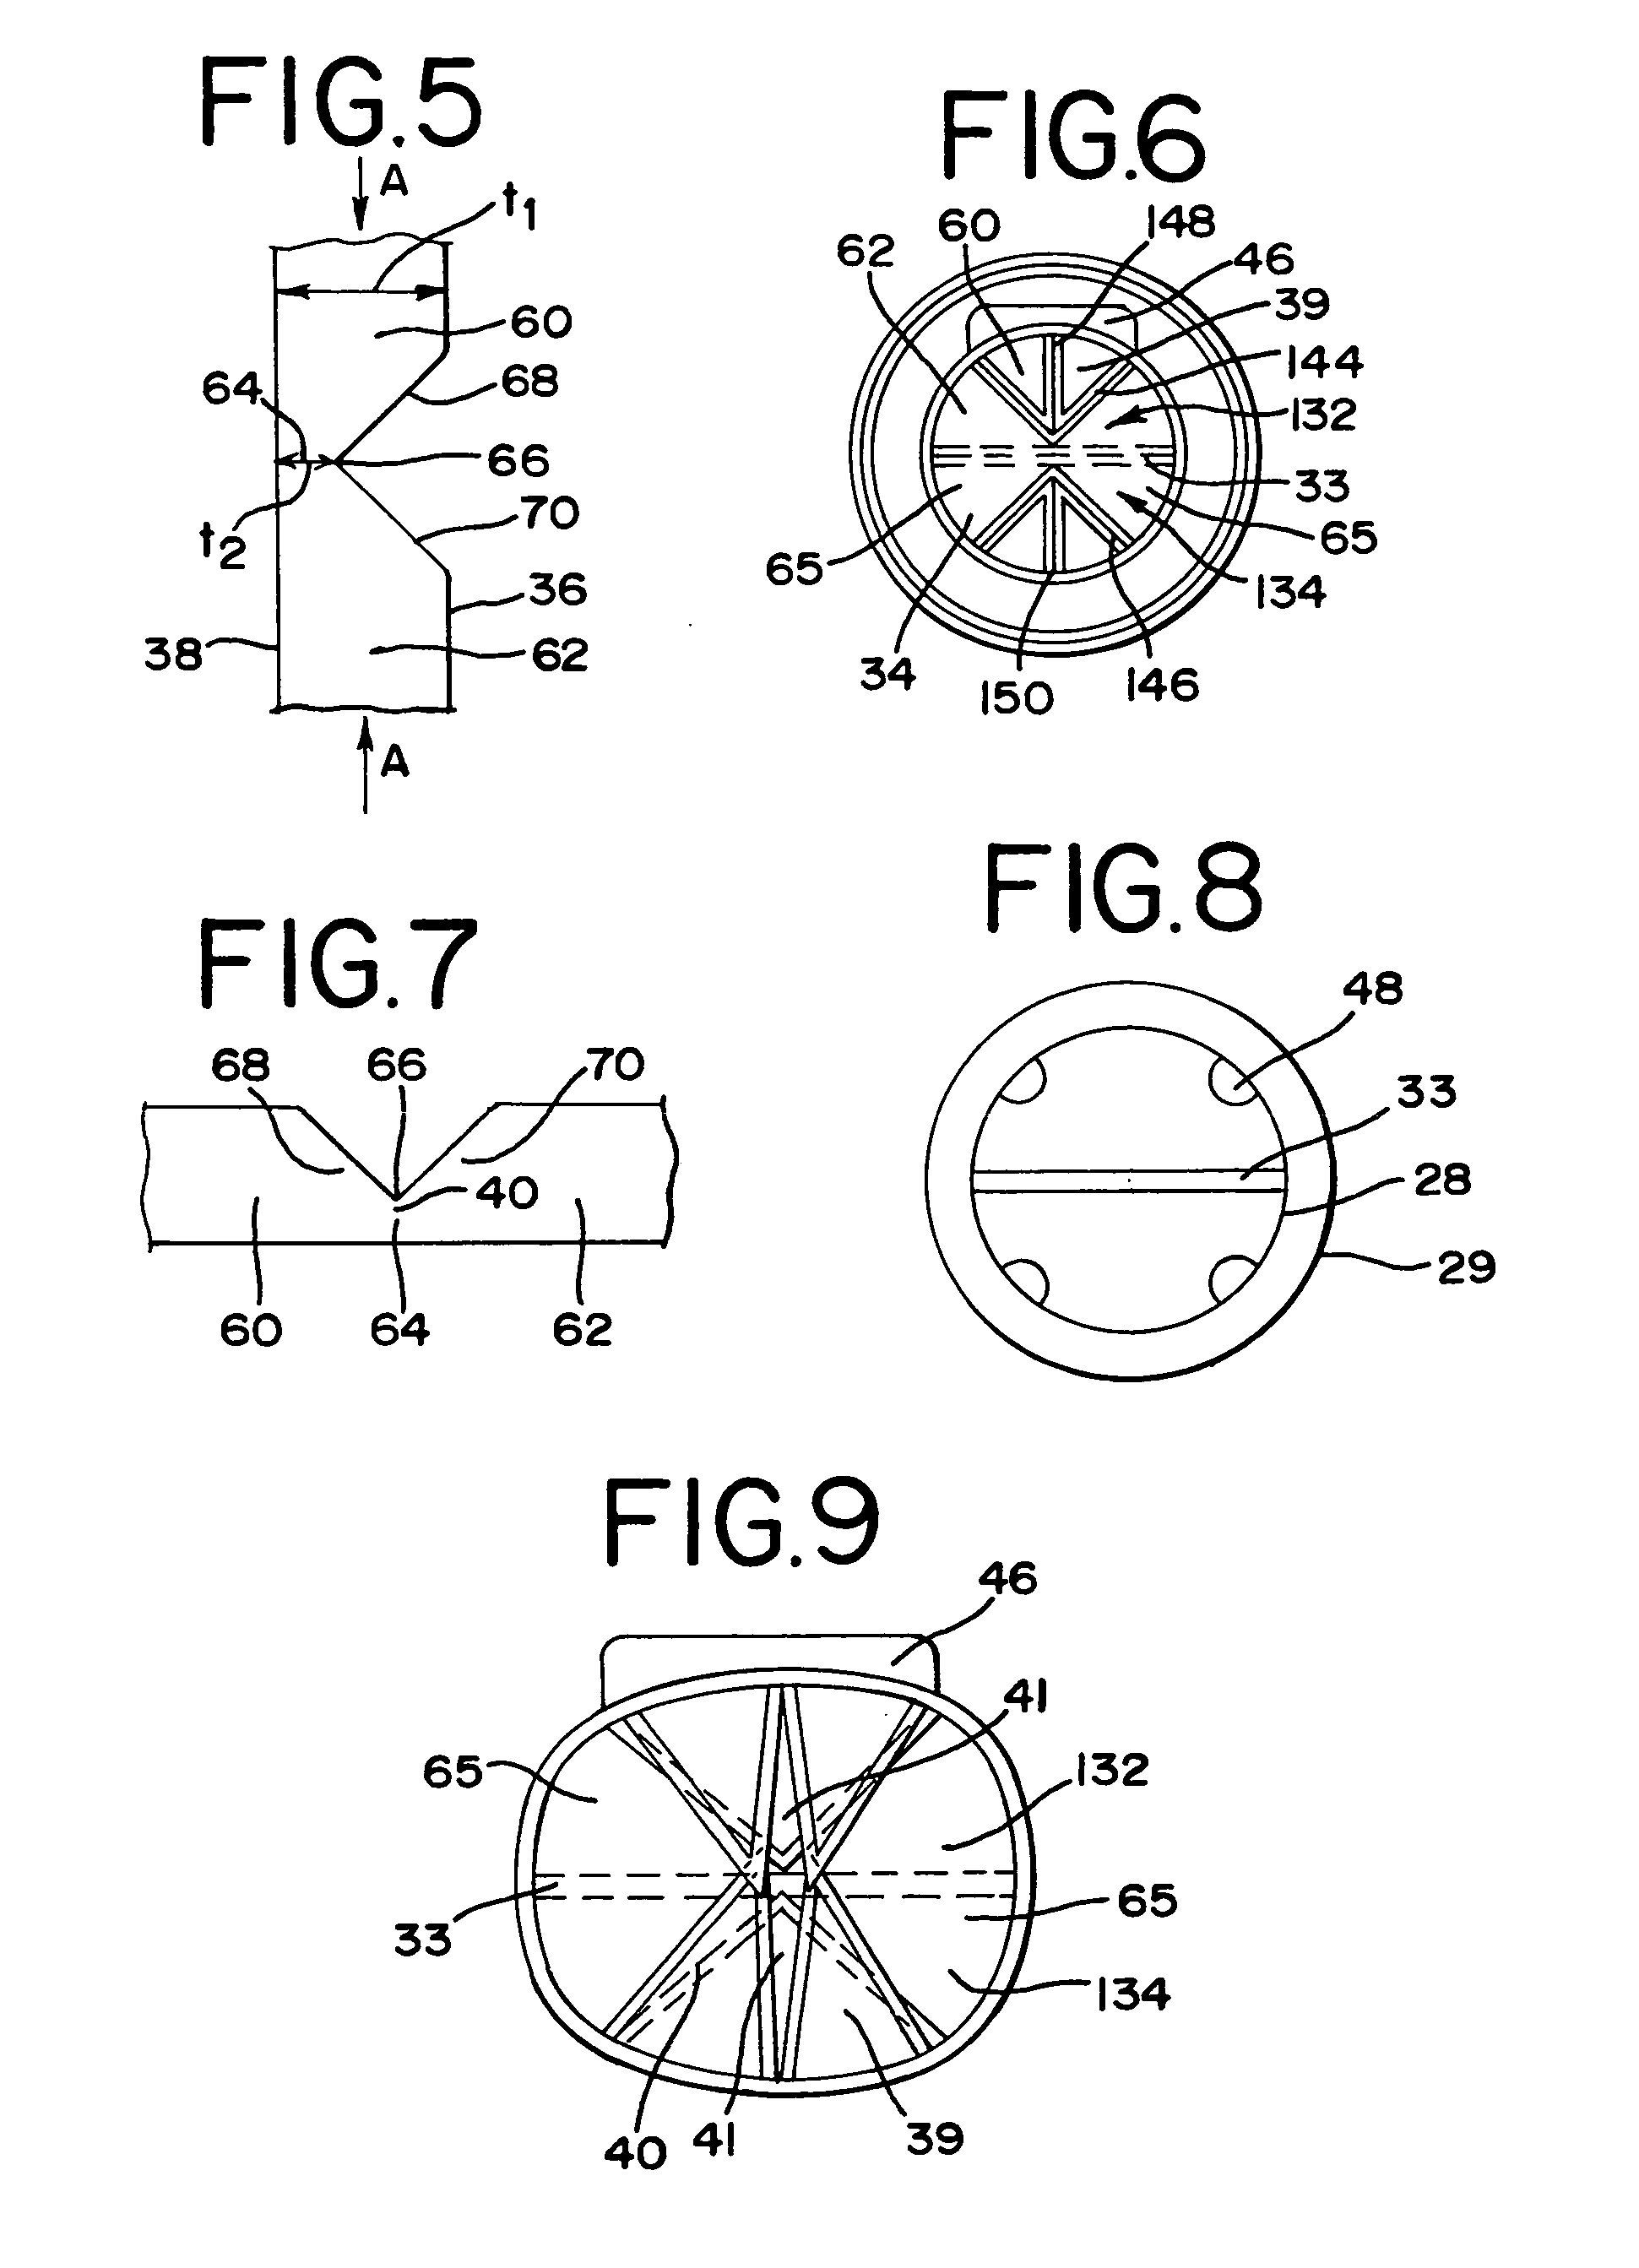 Multi-chambered dispenser and process